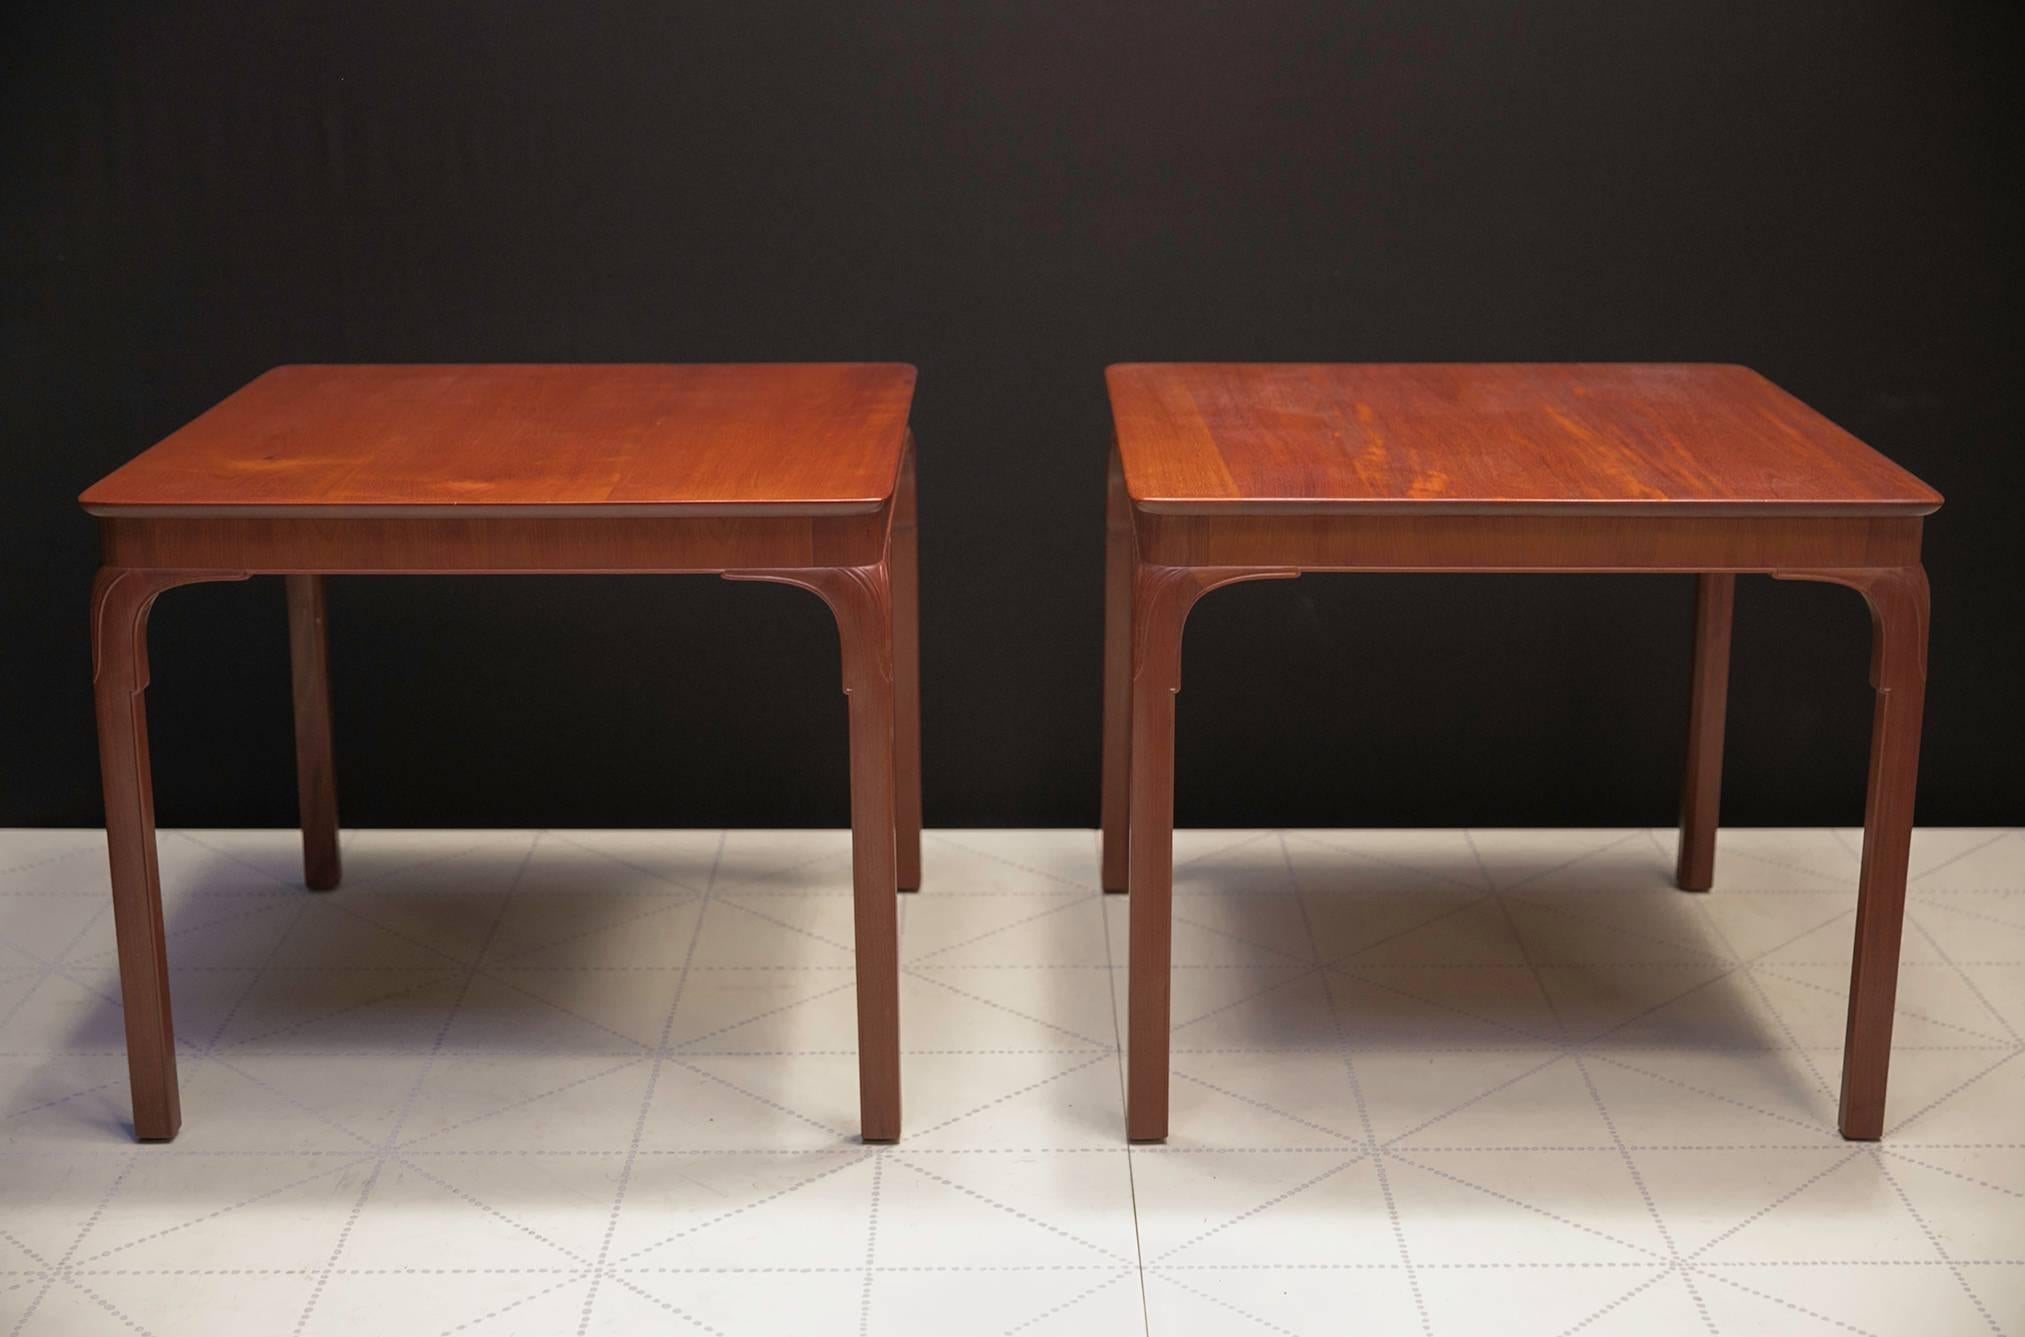 Frits Henningsen's Monumental Side Tables, Solid Cuban Mahogany and Carved Legs. Frits Henningsen designed this table in the 1930s as a games or cafe table with a chair clearance of 26 5/8 inches under the apron. 

Today, these tables could also be